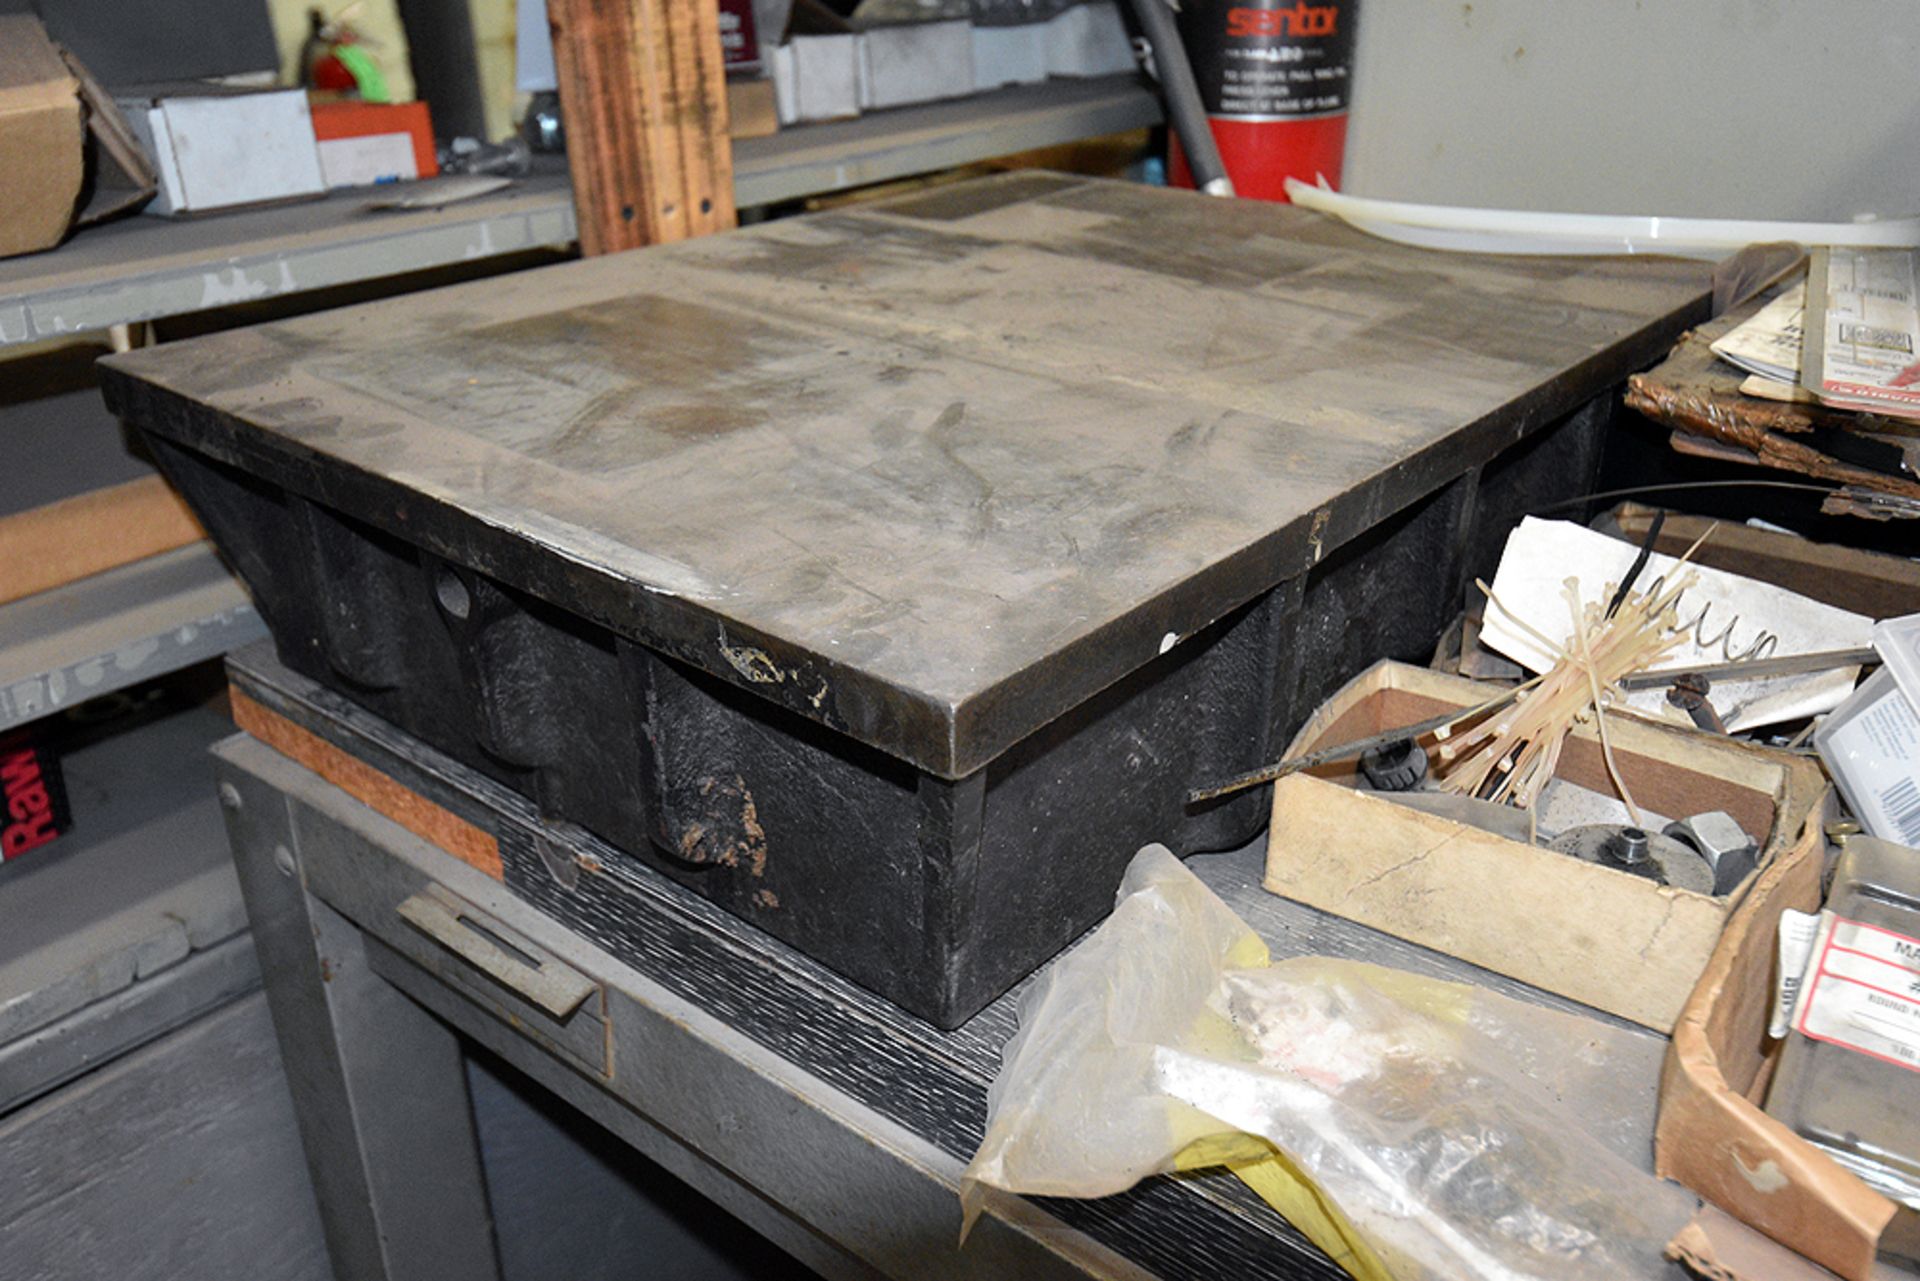 Work Surface w/Contents (Pump Parts) - Image 3 of 6